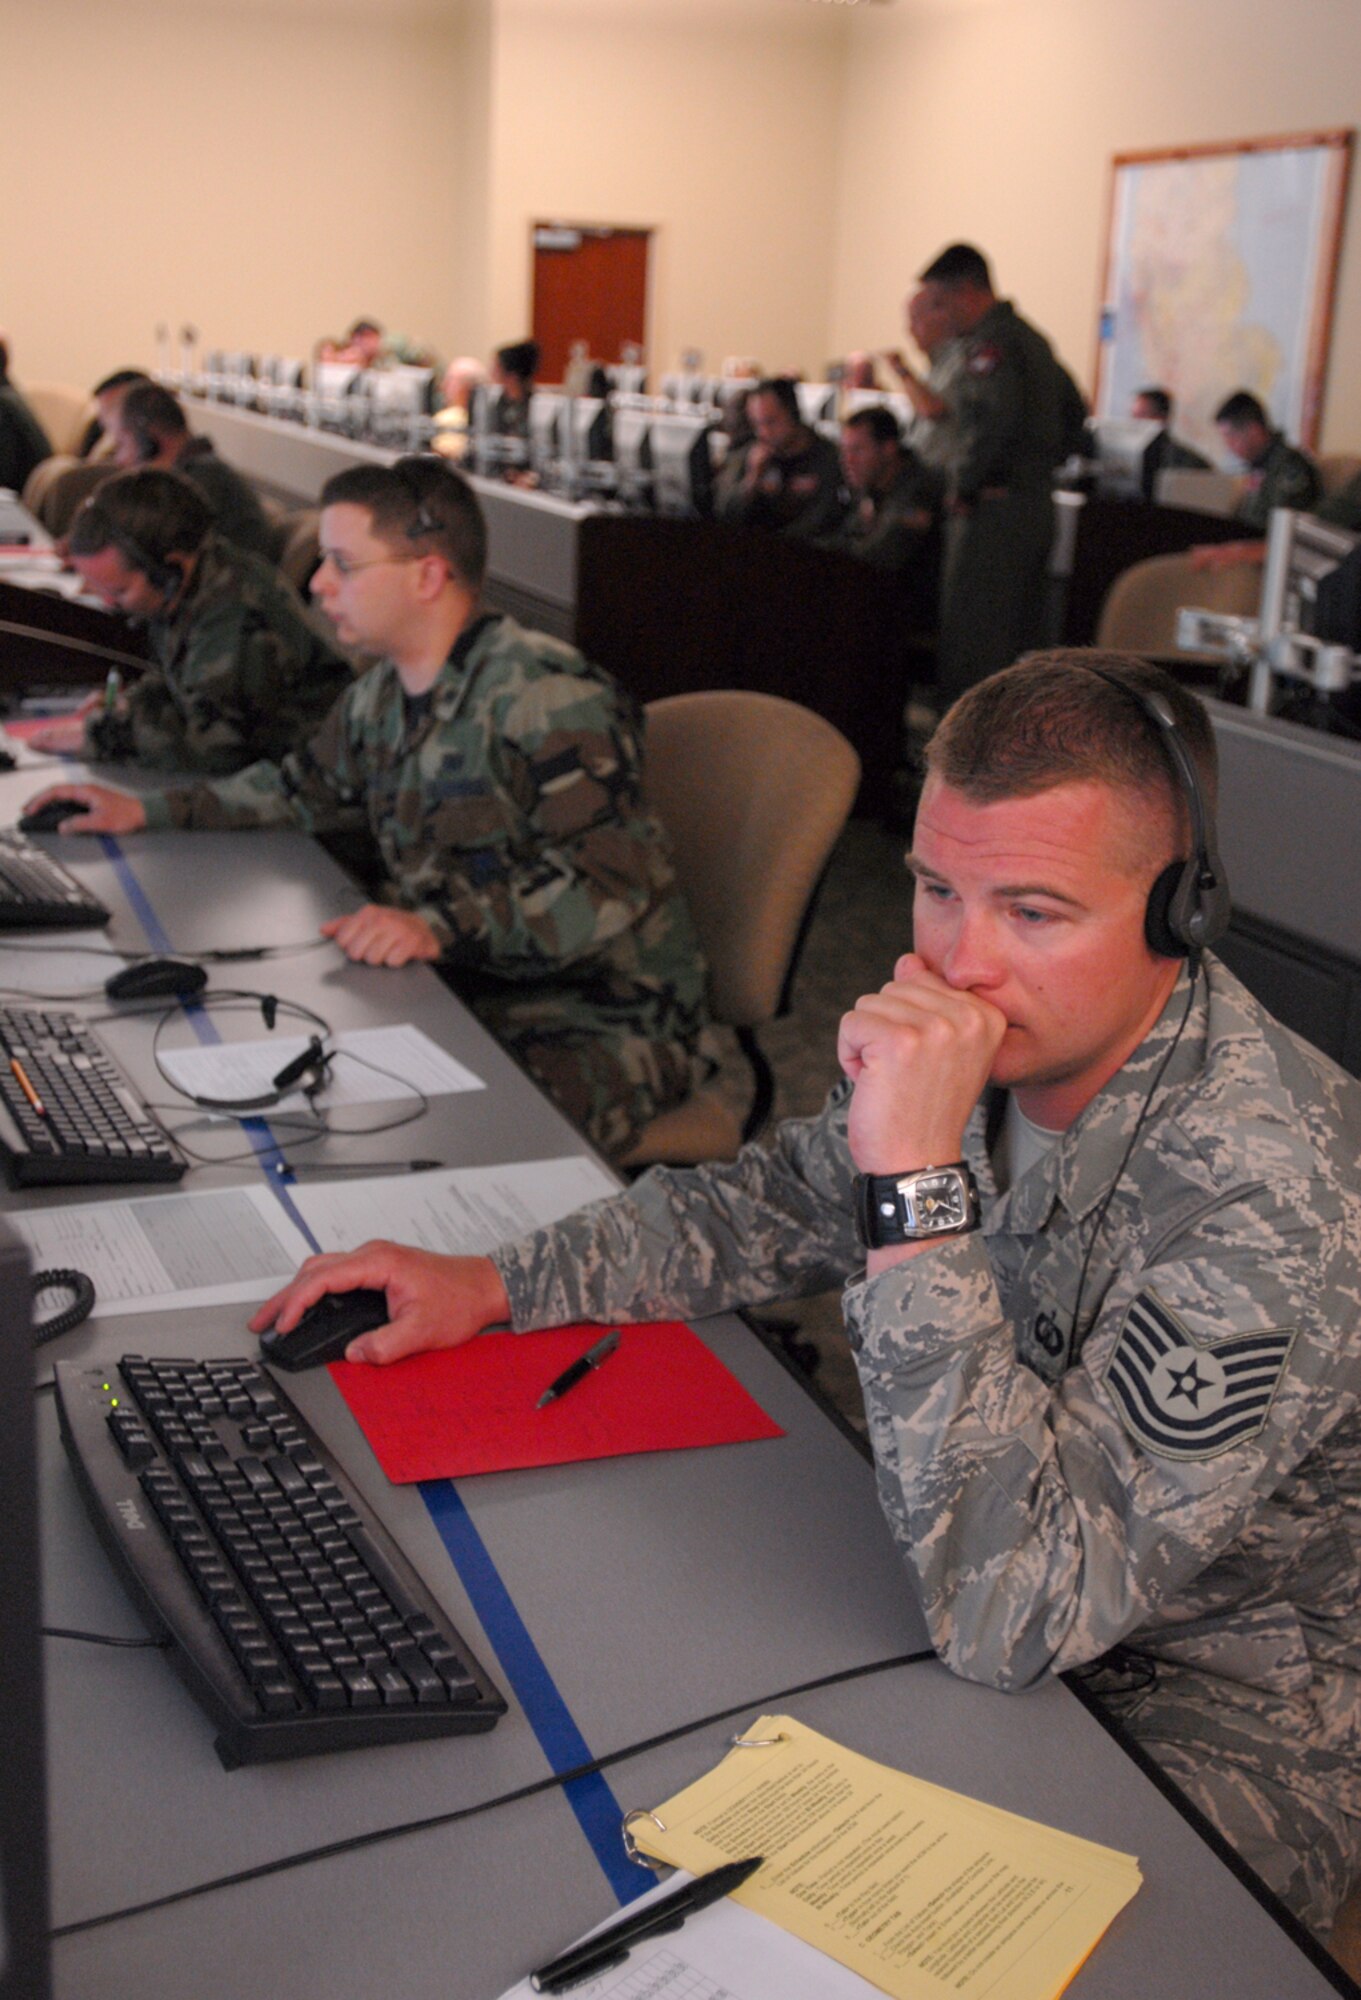 (Right to left) Tech. Sgt. Ryan Petterson, 1st Lt. Pan Hall and Maj. Jennifer Maceda, students at the 505th Training Squadron, manage air and space operations during an end of course exercise March 19 at Hurlburt Field. The exercise tests operational level command and control in an air operations center. (U.S. Air Force photo/Airman 1st Class Jason Epley)